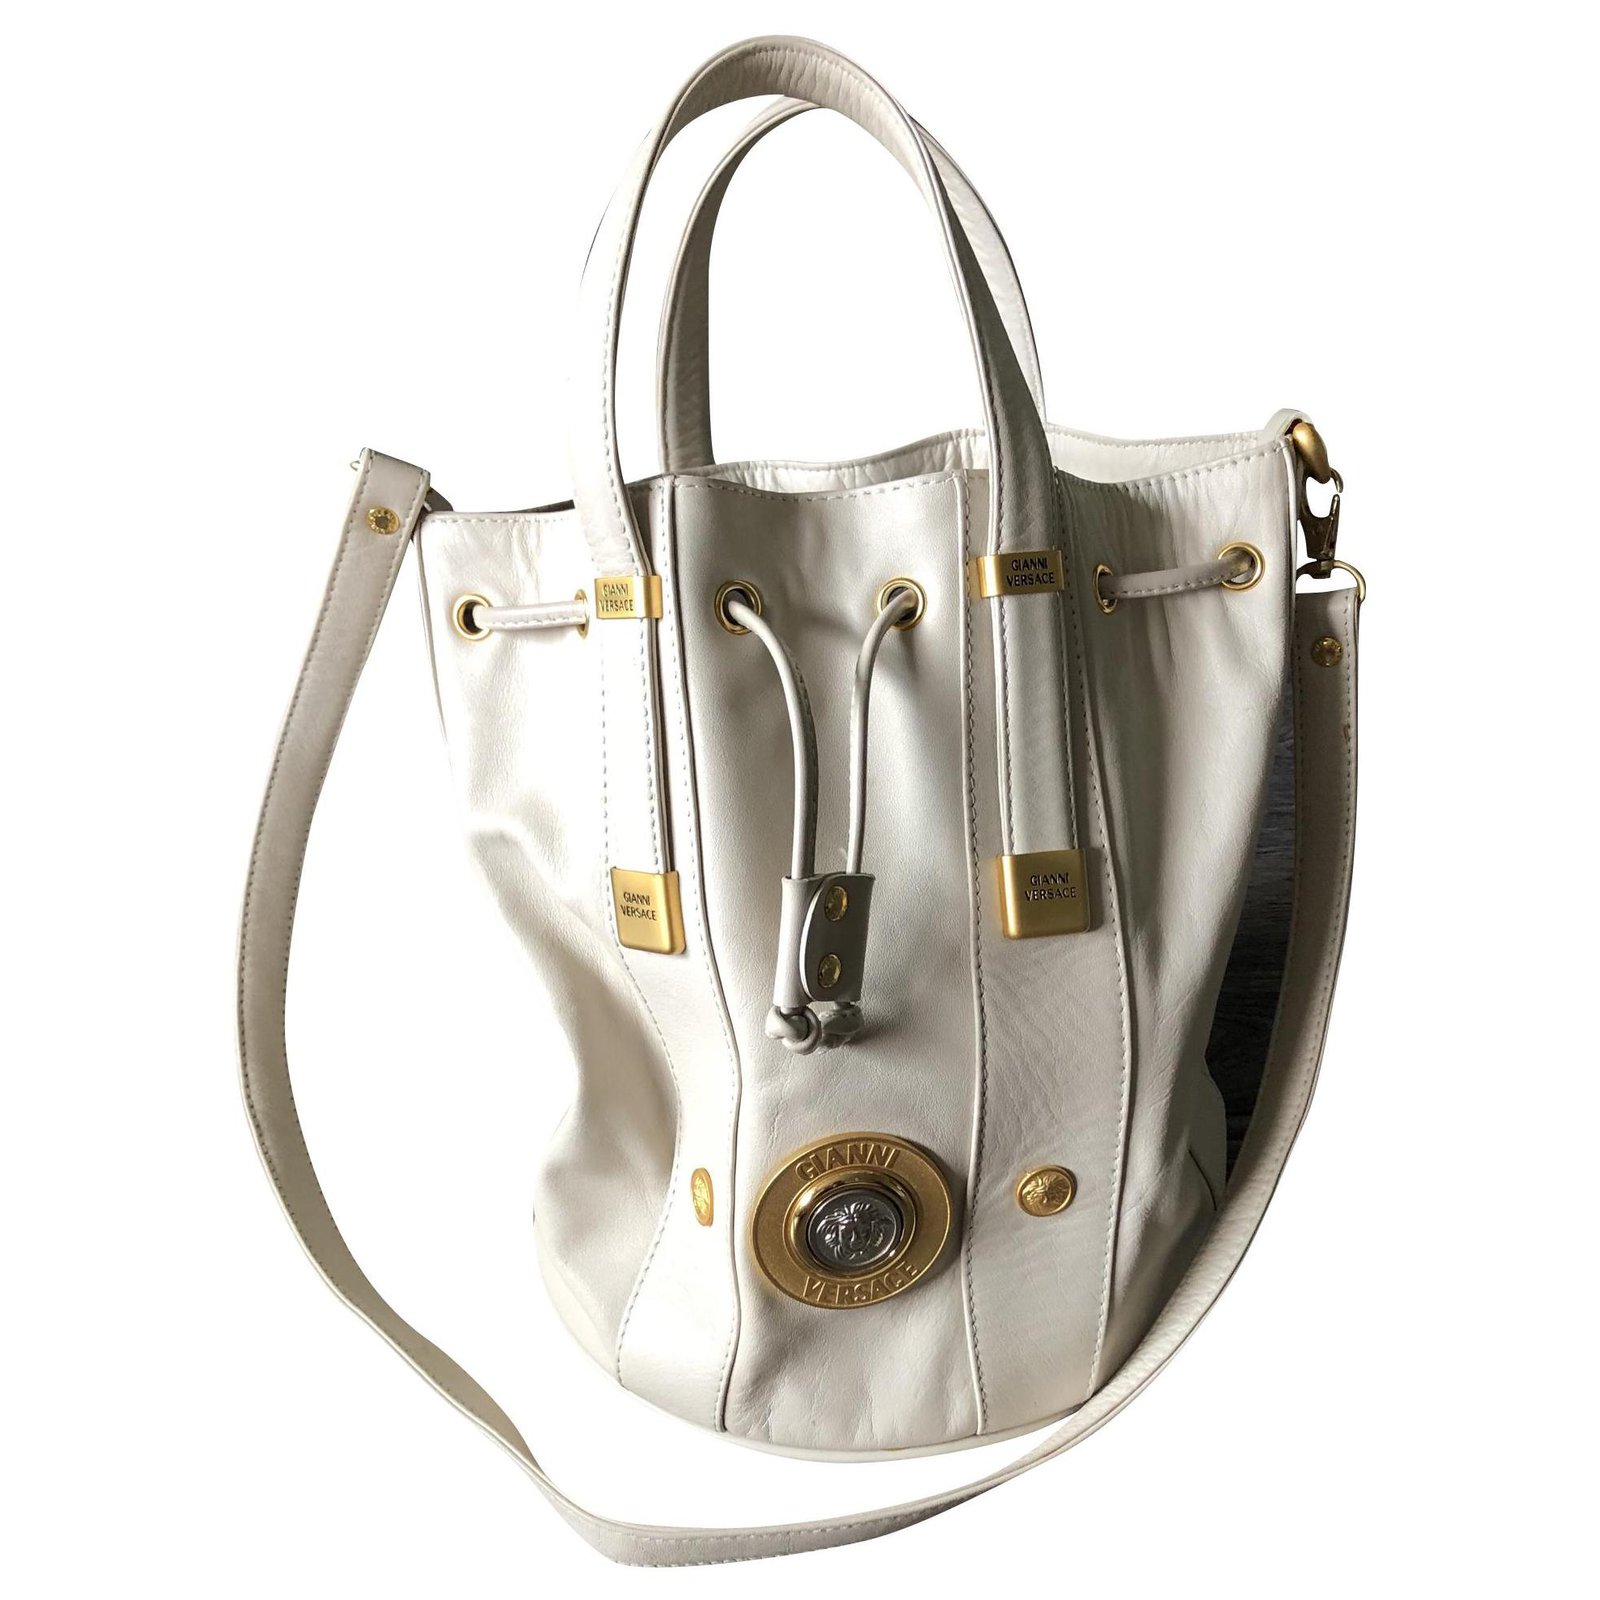 V ITALIA MADE IN ITALY Registered Trademark of Versace 19.69 Leather Mini  Bucket Bag on SALE